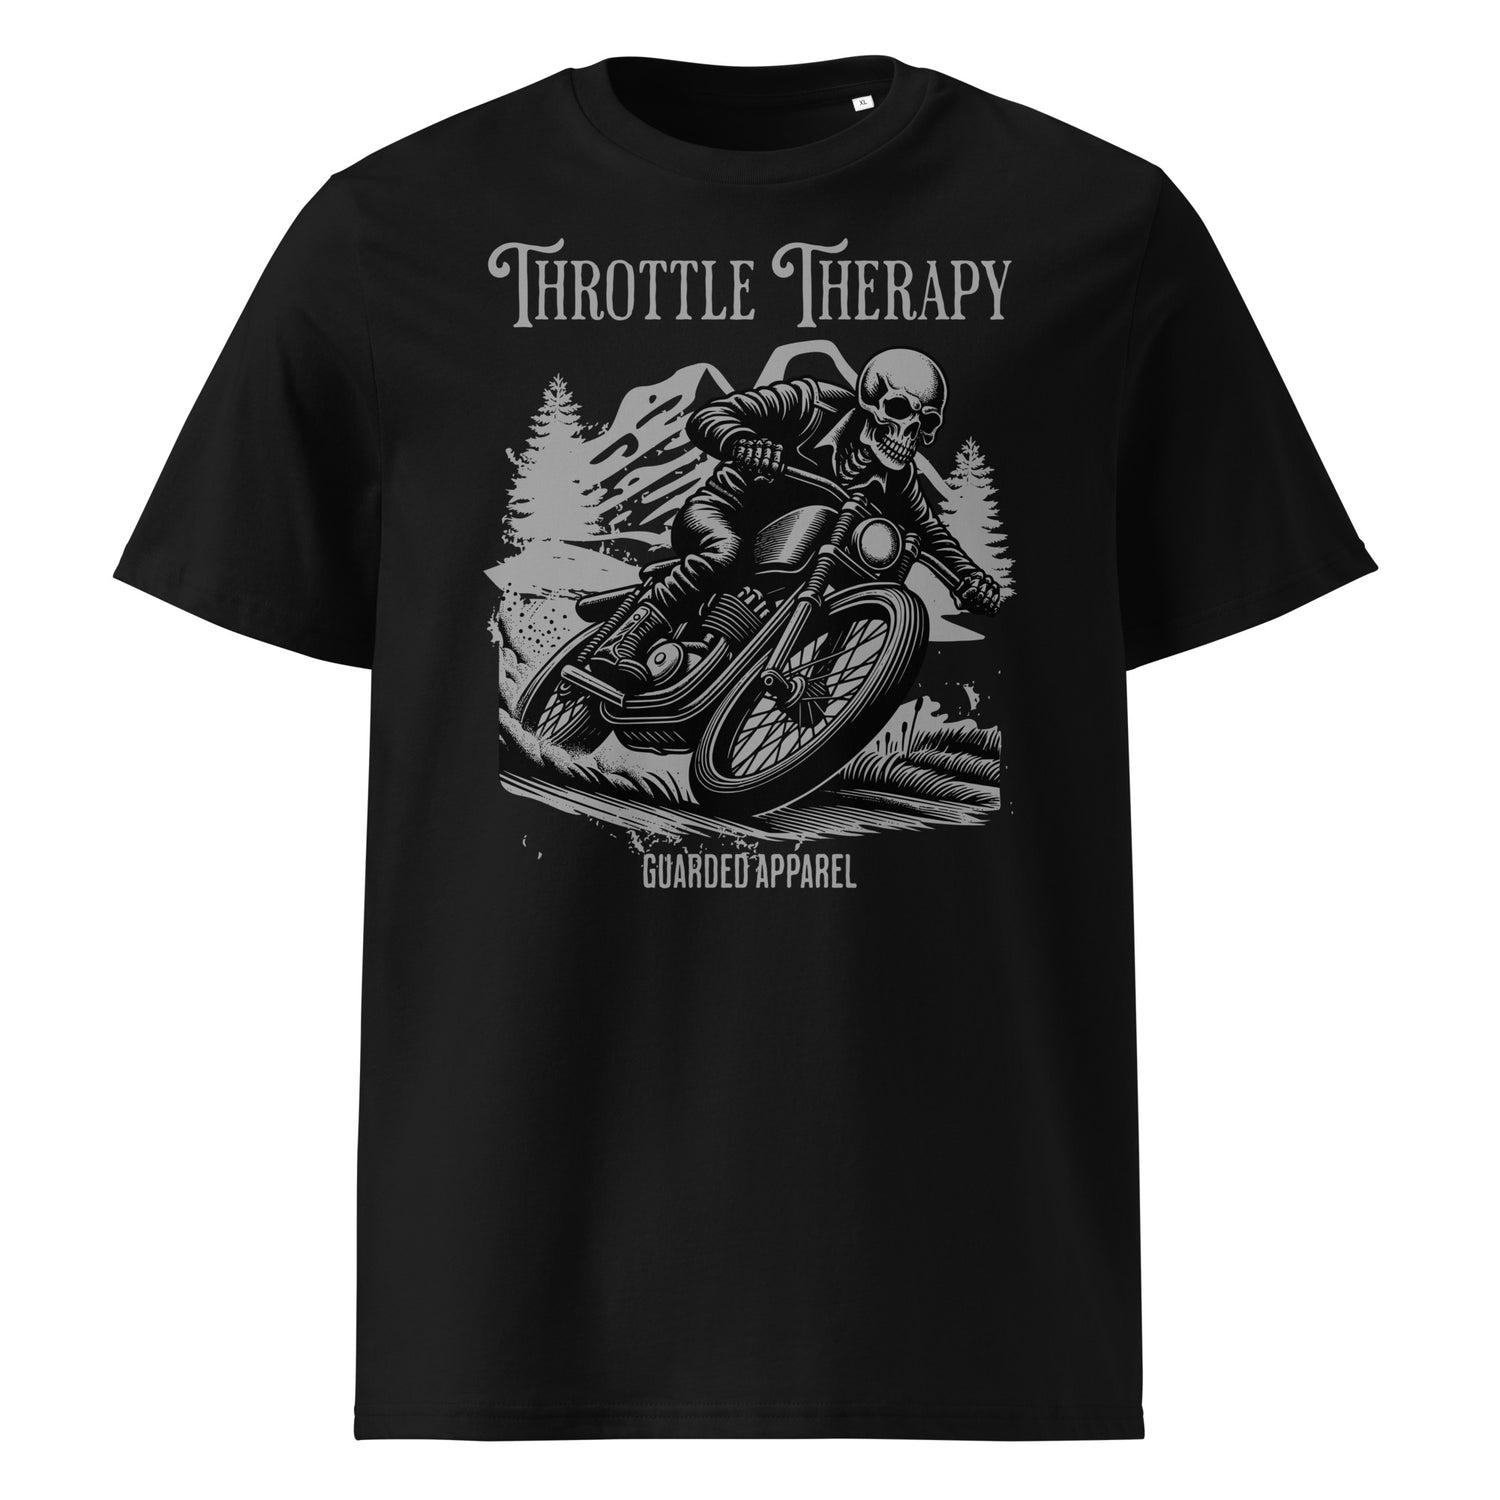 Throttle Therapy t-shirt